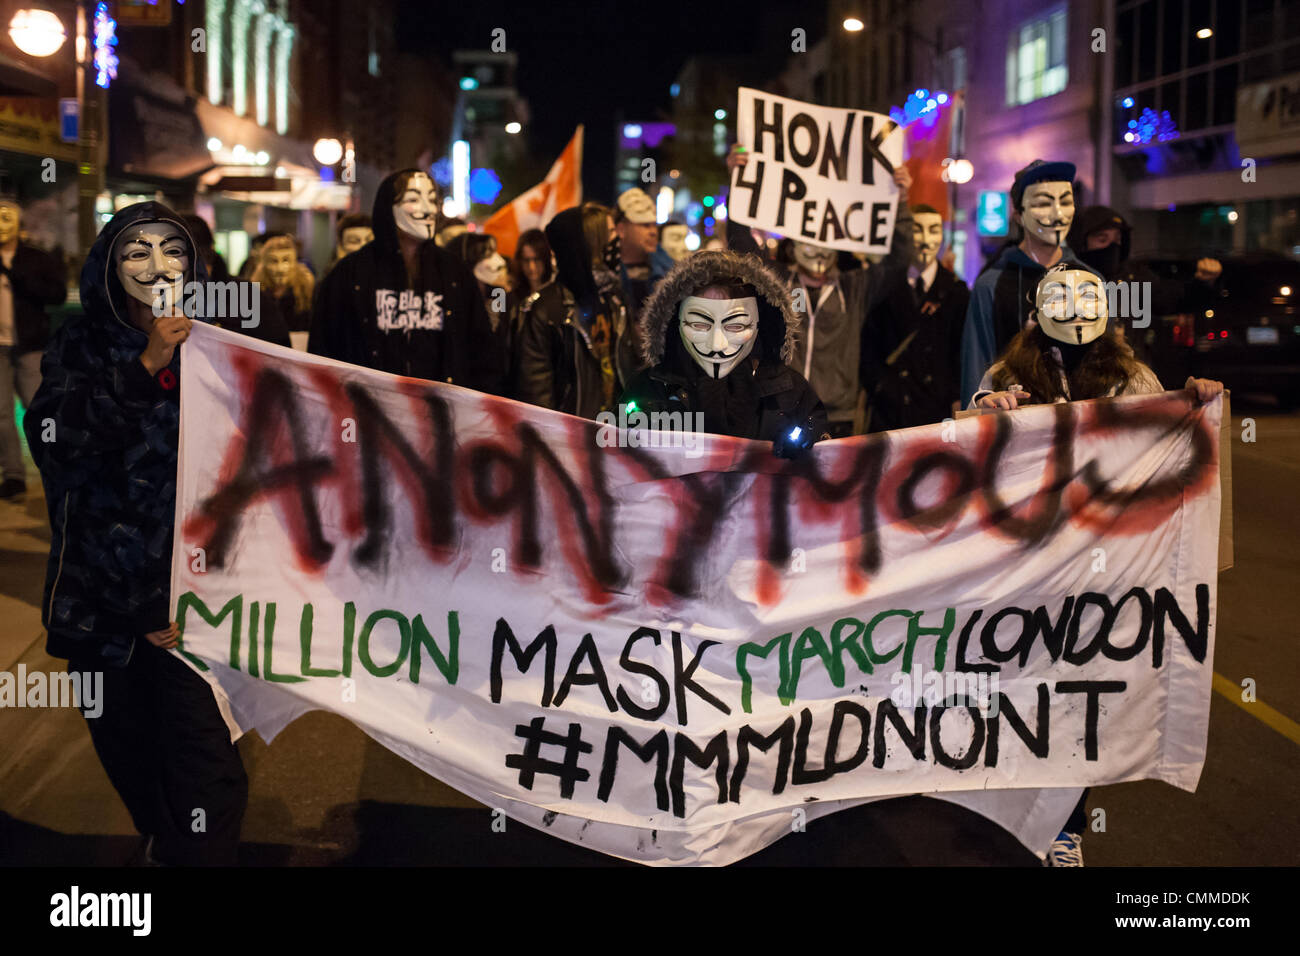 London, Ontario, Canada. 5th November 2013. The Anonymous movement, a continuation of the Occupy protest of 2011-2012 made a comback around the world on November 5, 2013 as the 'Million Mask March.' Protesters assembled in Victoria Park in the cities downtown core, the same park where nearly two years ago to the day local police evicted Occupy protestors who had set up camp. Credit:  Mark Spowart/Alamy Live News Stock Photo